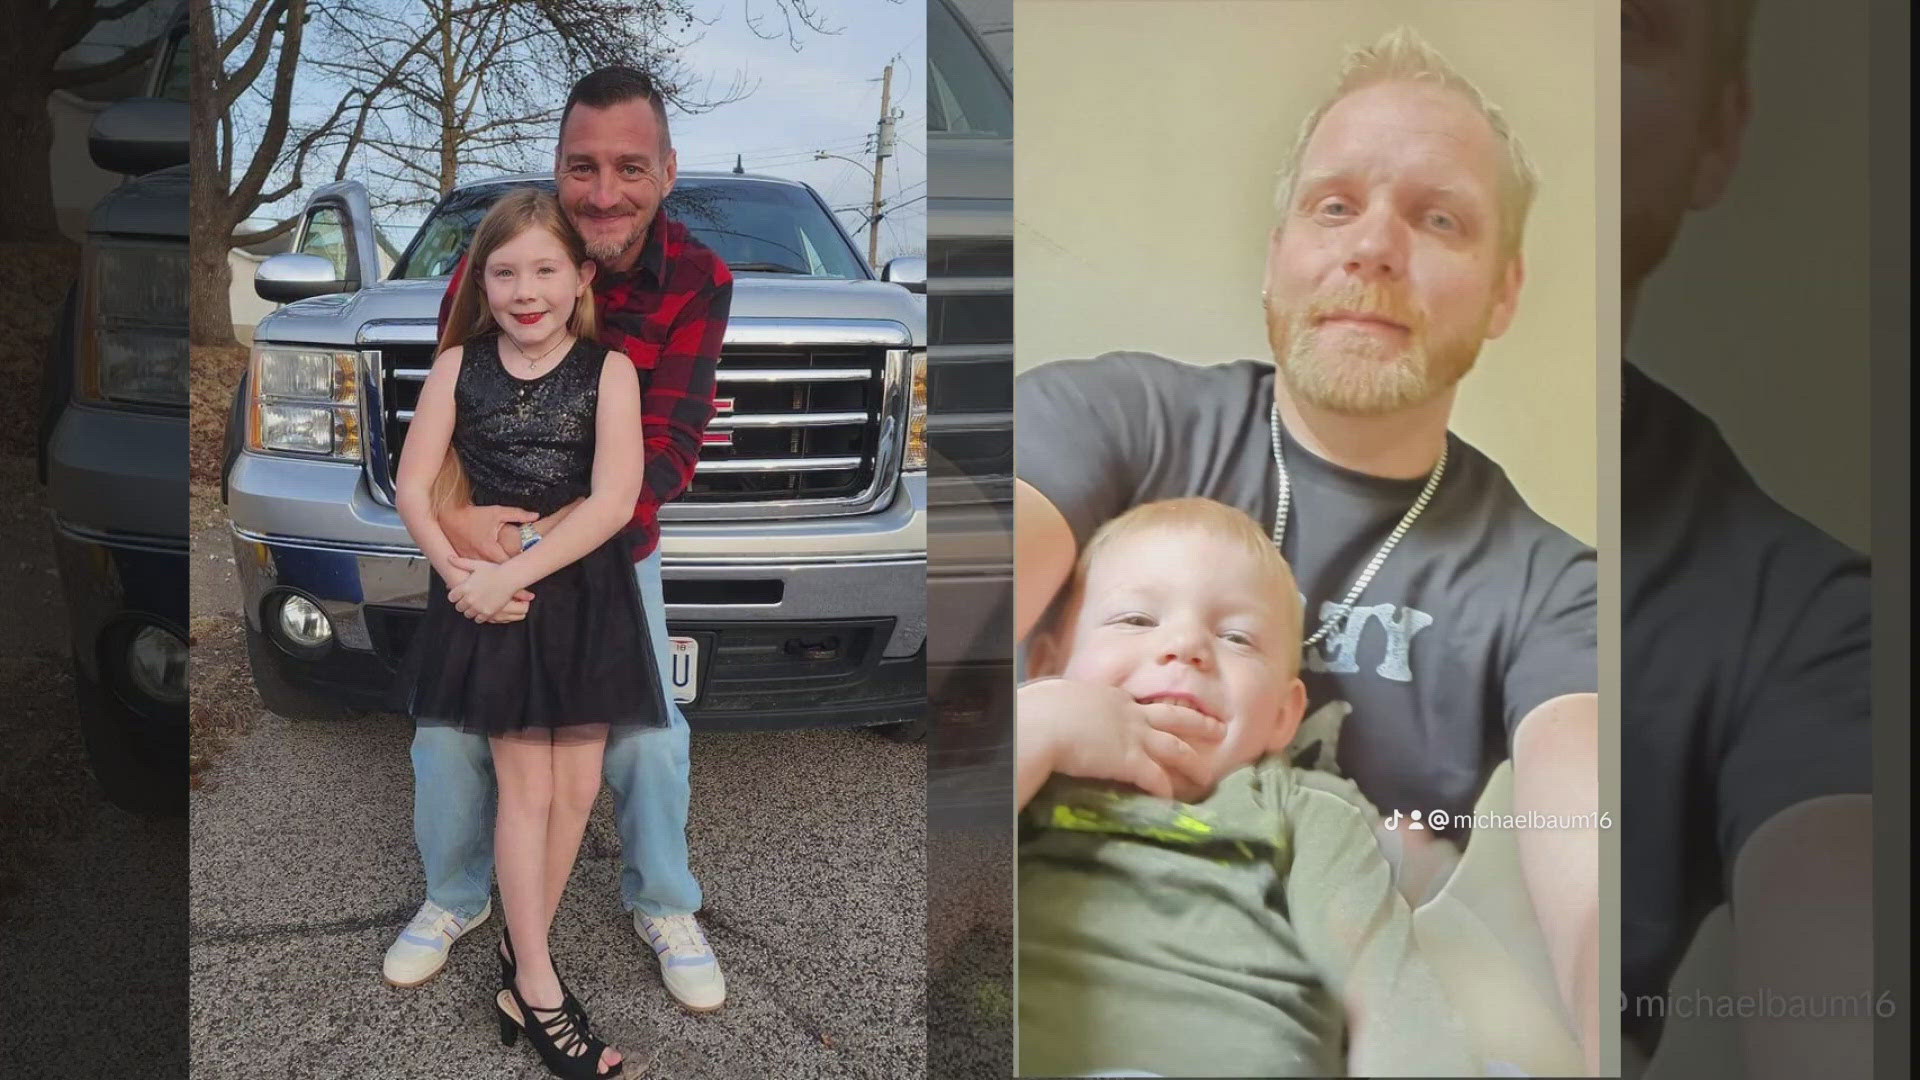 Both fathers said they want their children, Scarlet Parmeley-Daugherty and Isaac Baum, to be remembered as the beautiful and loving siblings they were.